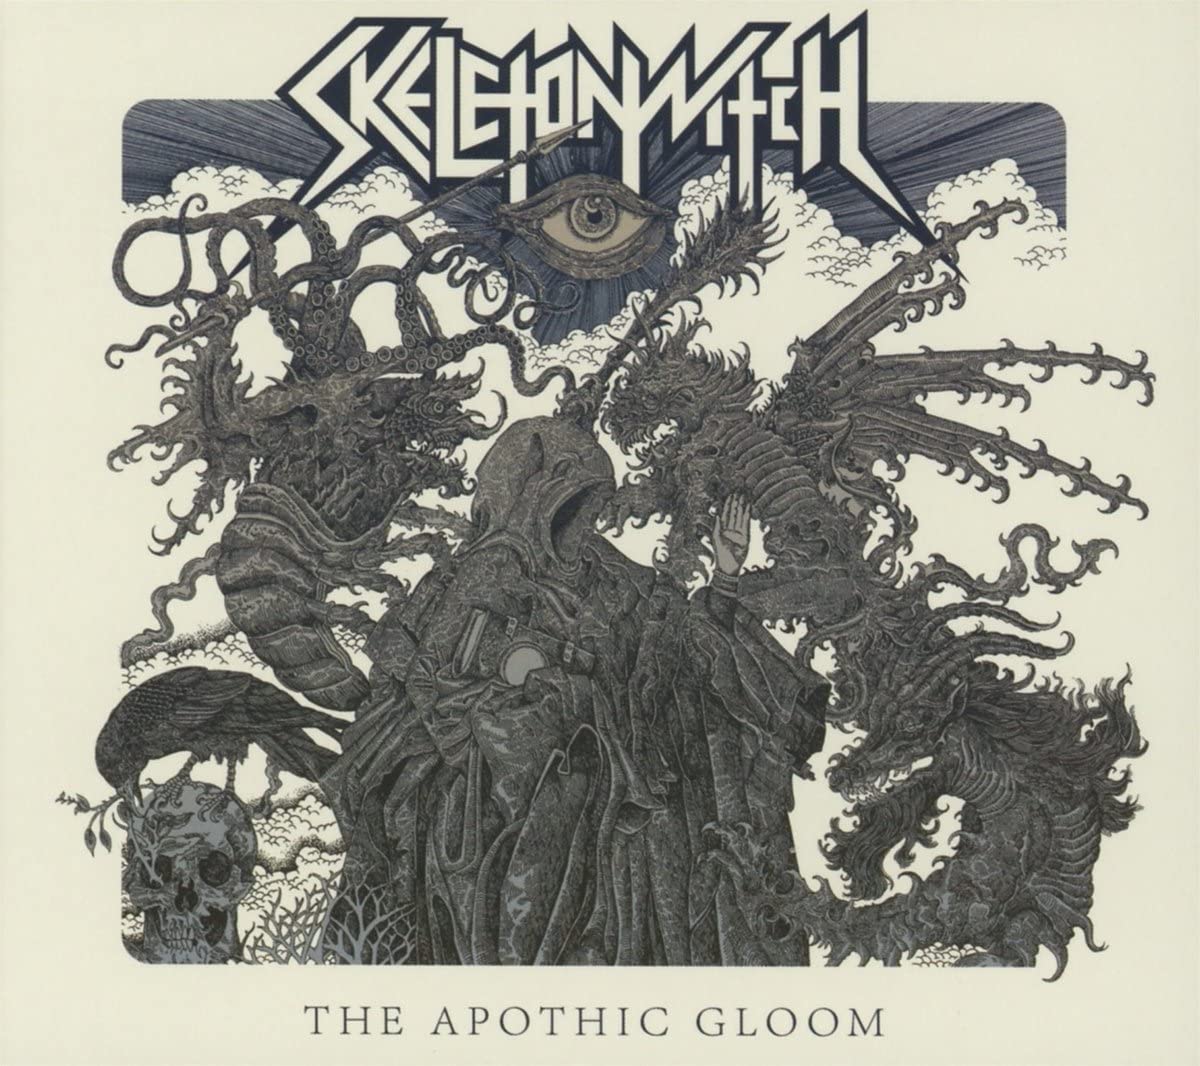 Skeletonwitch - Apothic Gloom - CD